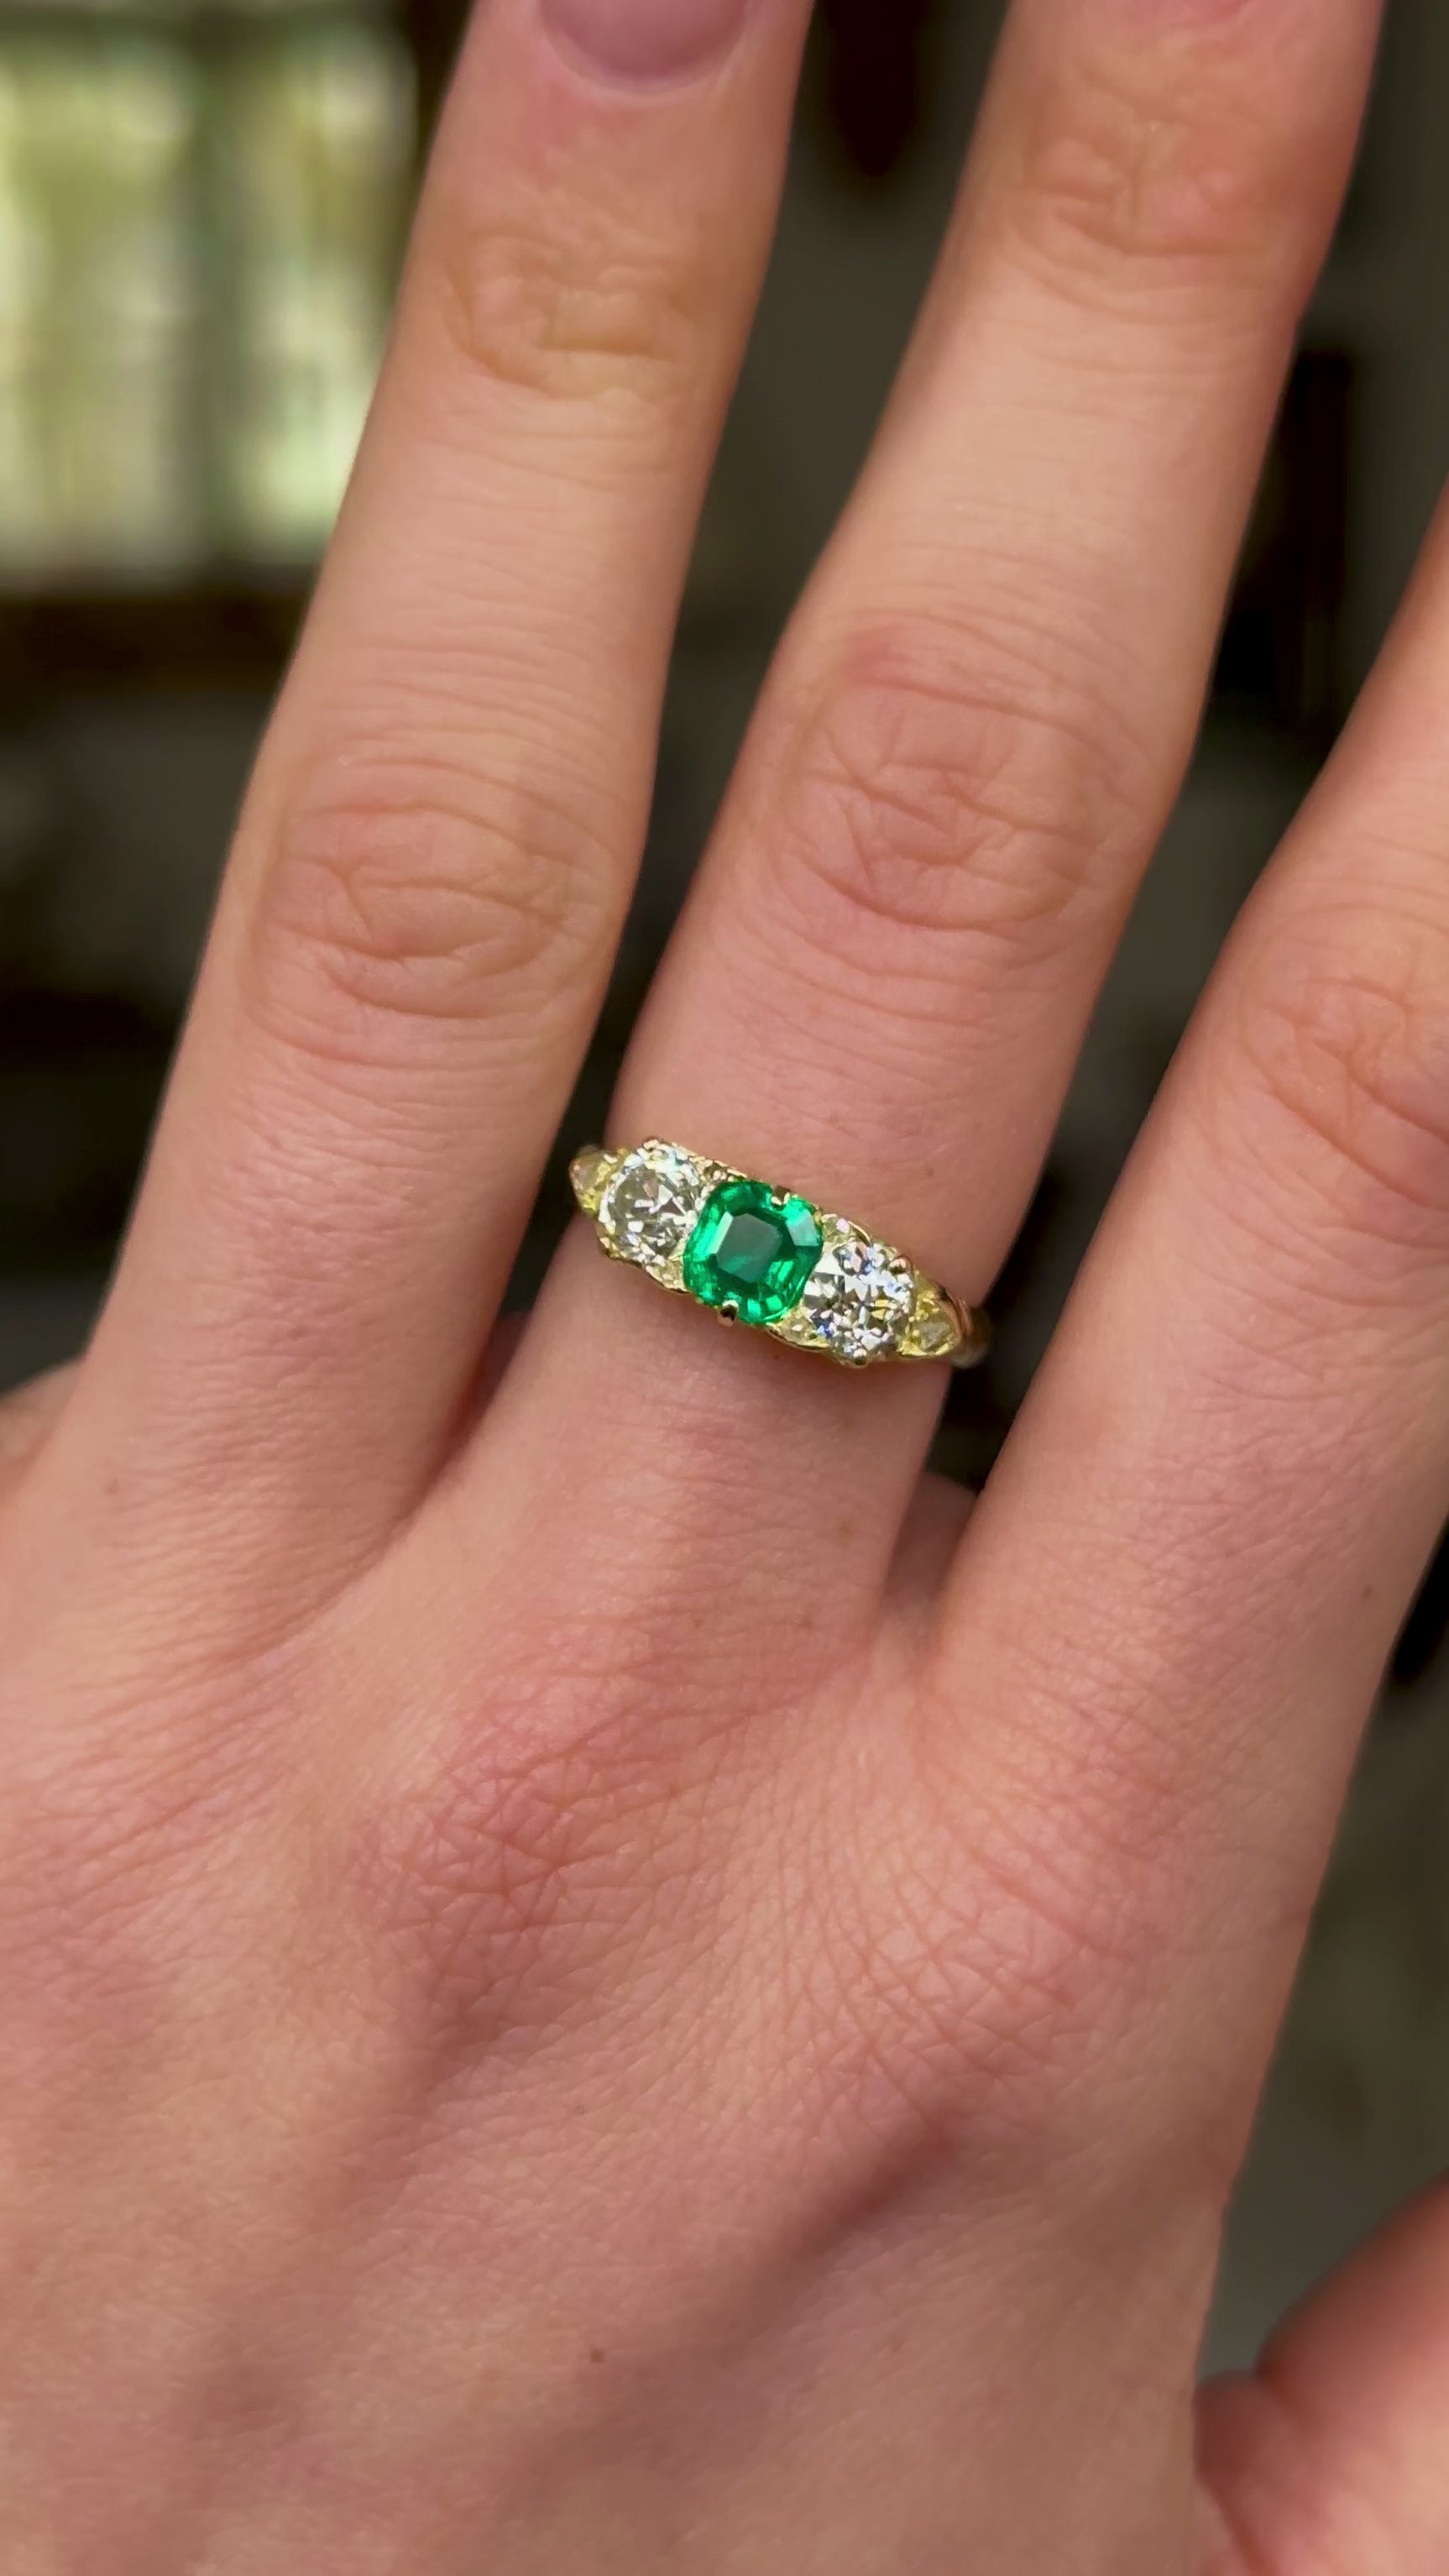 Antique, Edwardian Emerald and Diamond Three Stone Ring, 18ct Yellow Gold, worn on hand and moved around to give perspective.